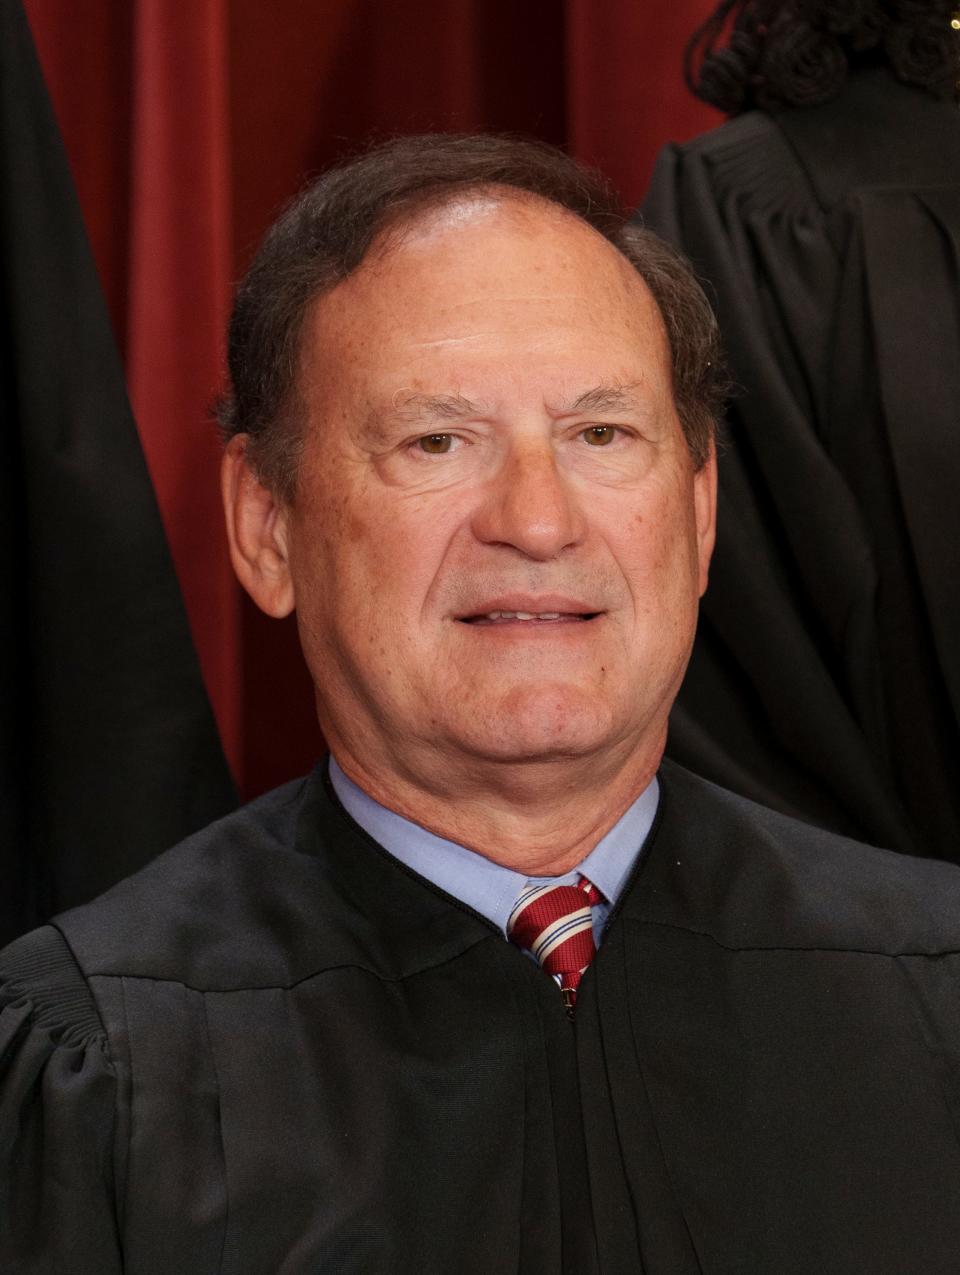 Oct 7, 2022; Washington, DC, USA; Members of the Supreme Court pose for a group photo at the Supreme Court. Associate Justice Samuel A. Alito, Jr. Mandatory Credit: Jack Gruber-USA TODAY ORG XMIT: USAT-510520 (Via OlyDrop)